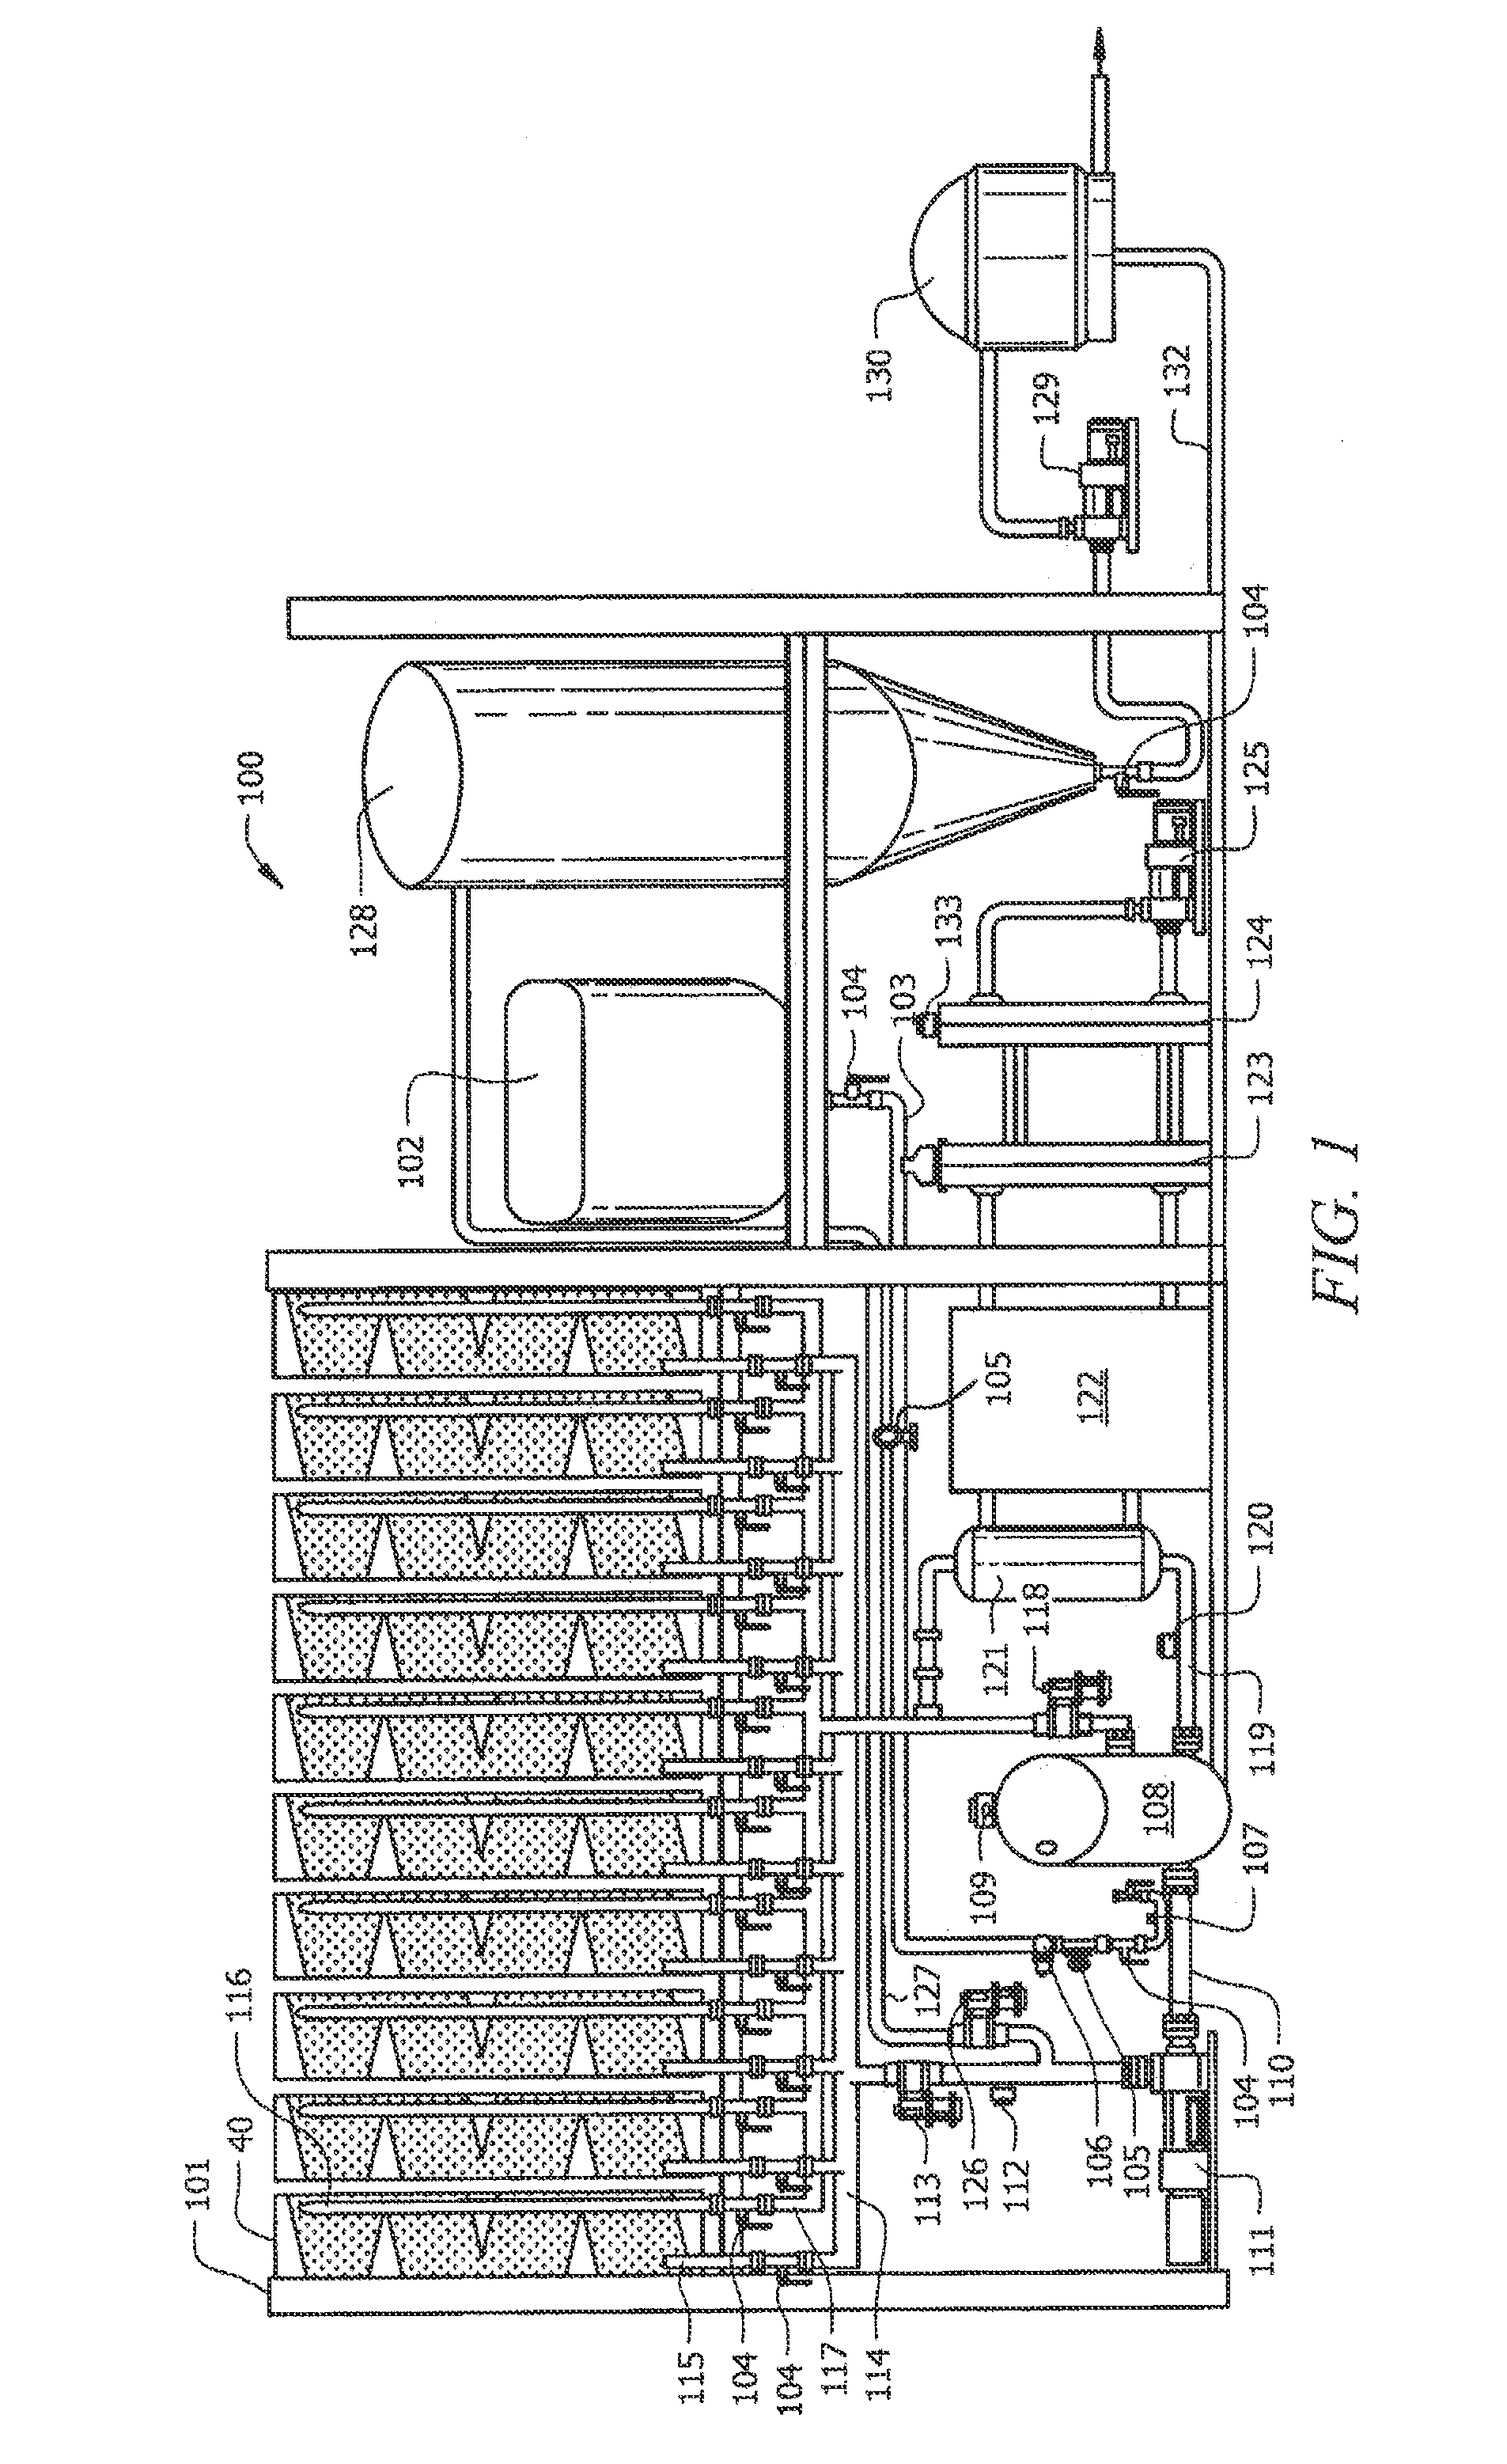 Method of removing algae adhered inside a bioreactor through combined backwashing and lowering of pH level